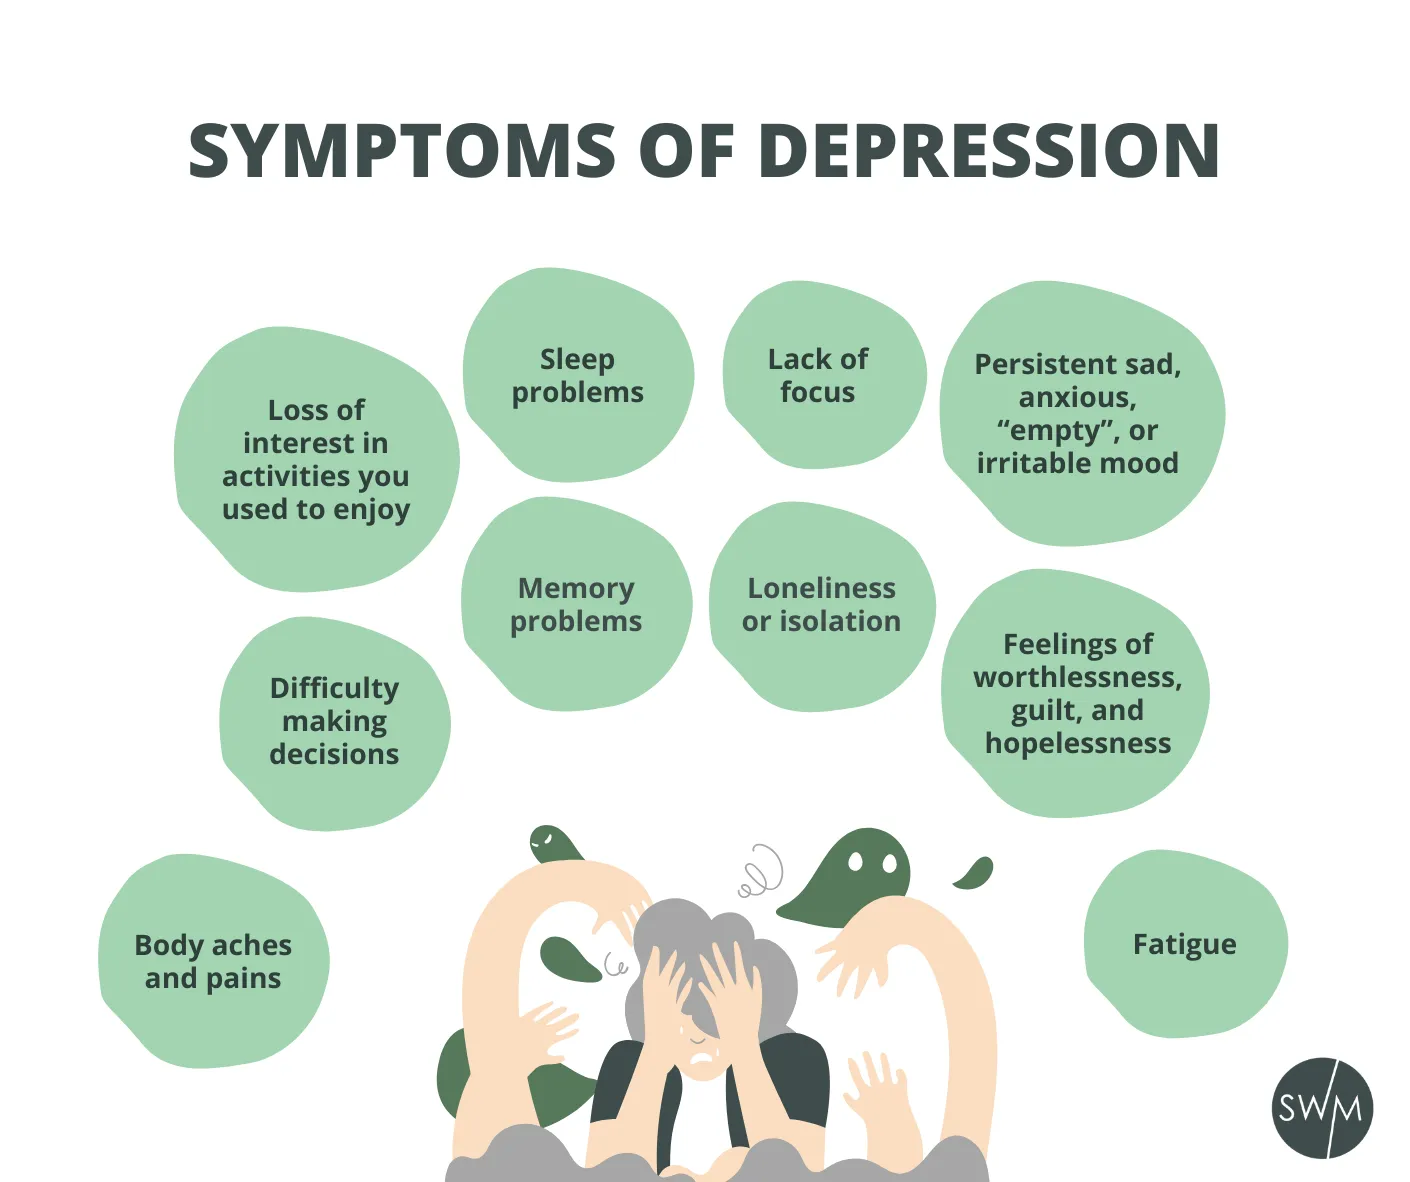 symptoms of depression are: Persistent sad, anxious, “empty”, or irritable mood Lack of focus Sleep problems Loss of interest in activities you used to enjoy Memory problems Feelings of worthlessness, guilt, and hopelessness Changes in appetite Body aches and pains Difficulty making decisions Loneliness or isolation